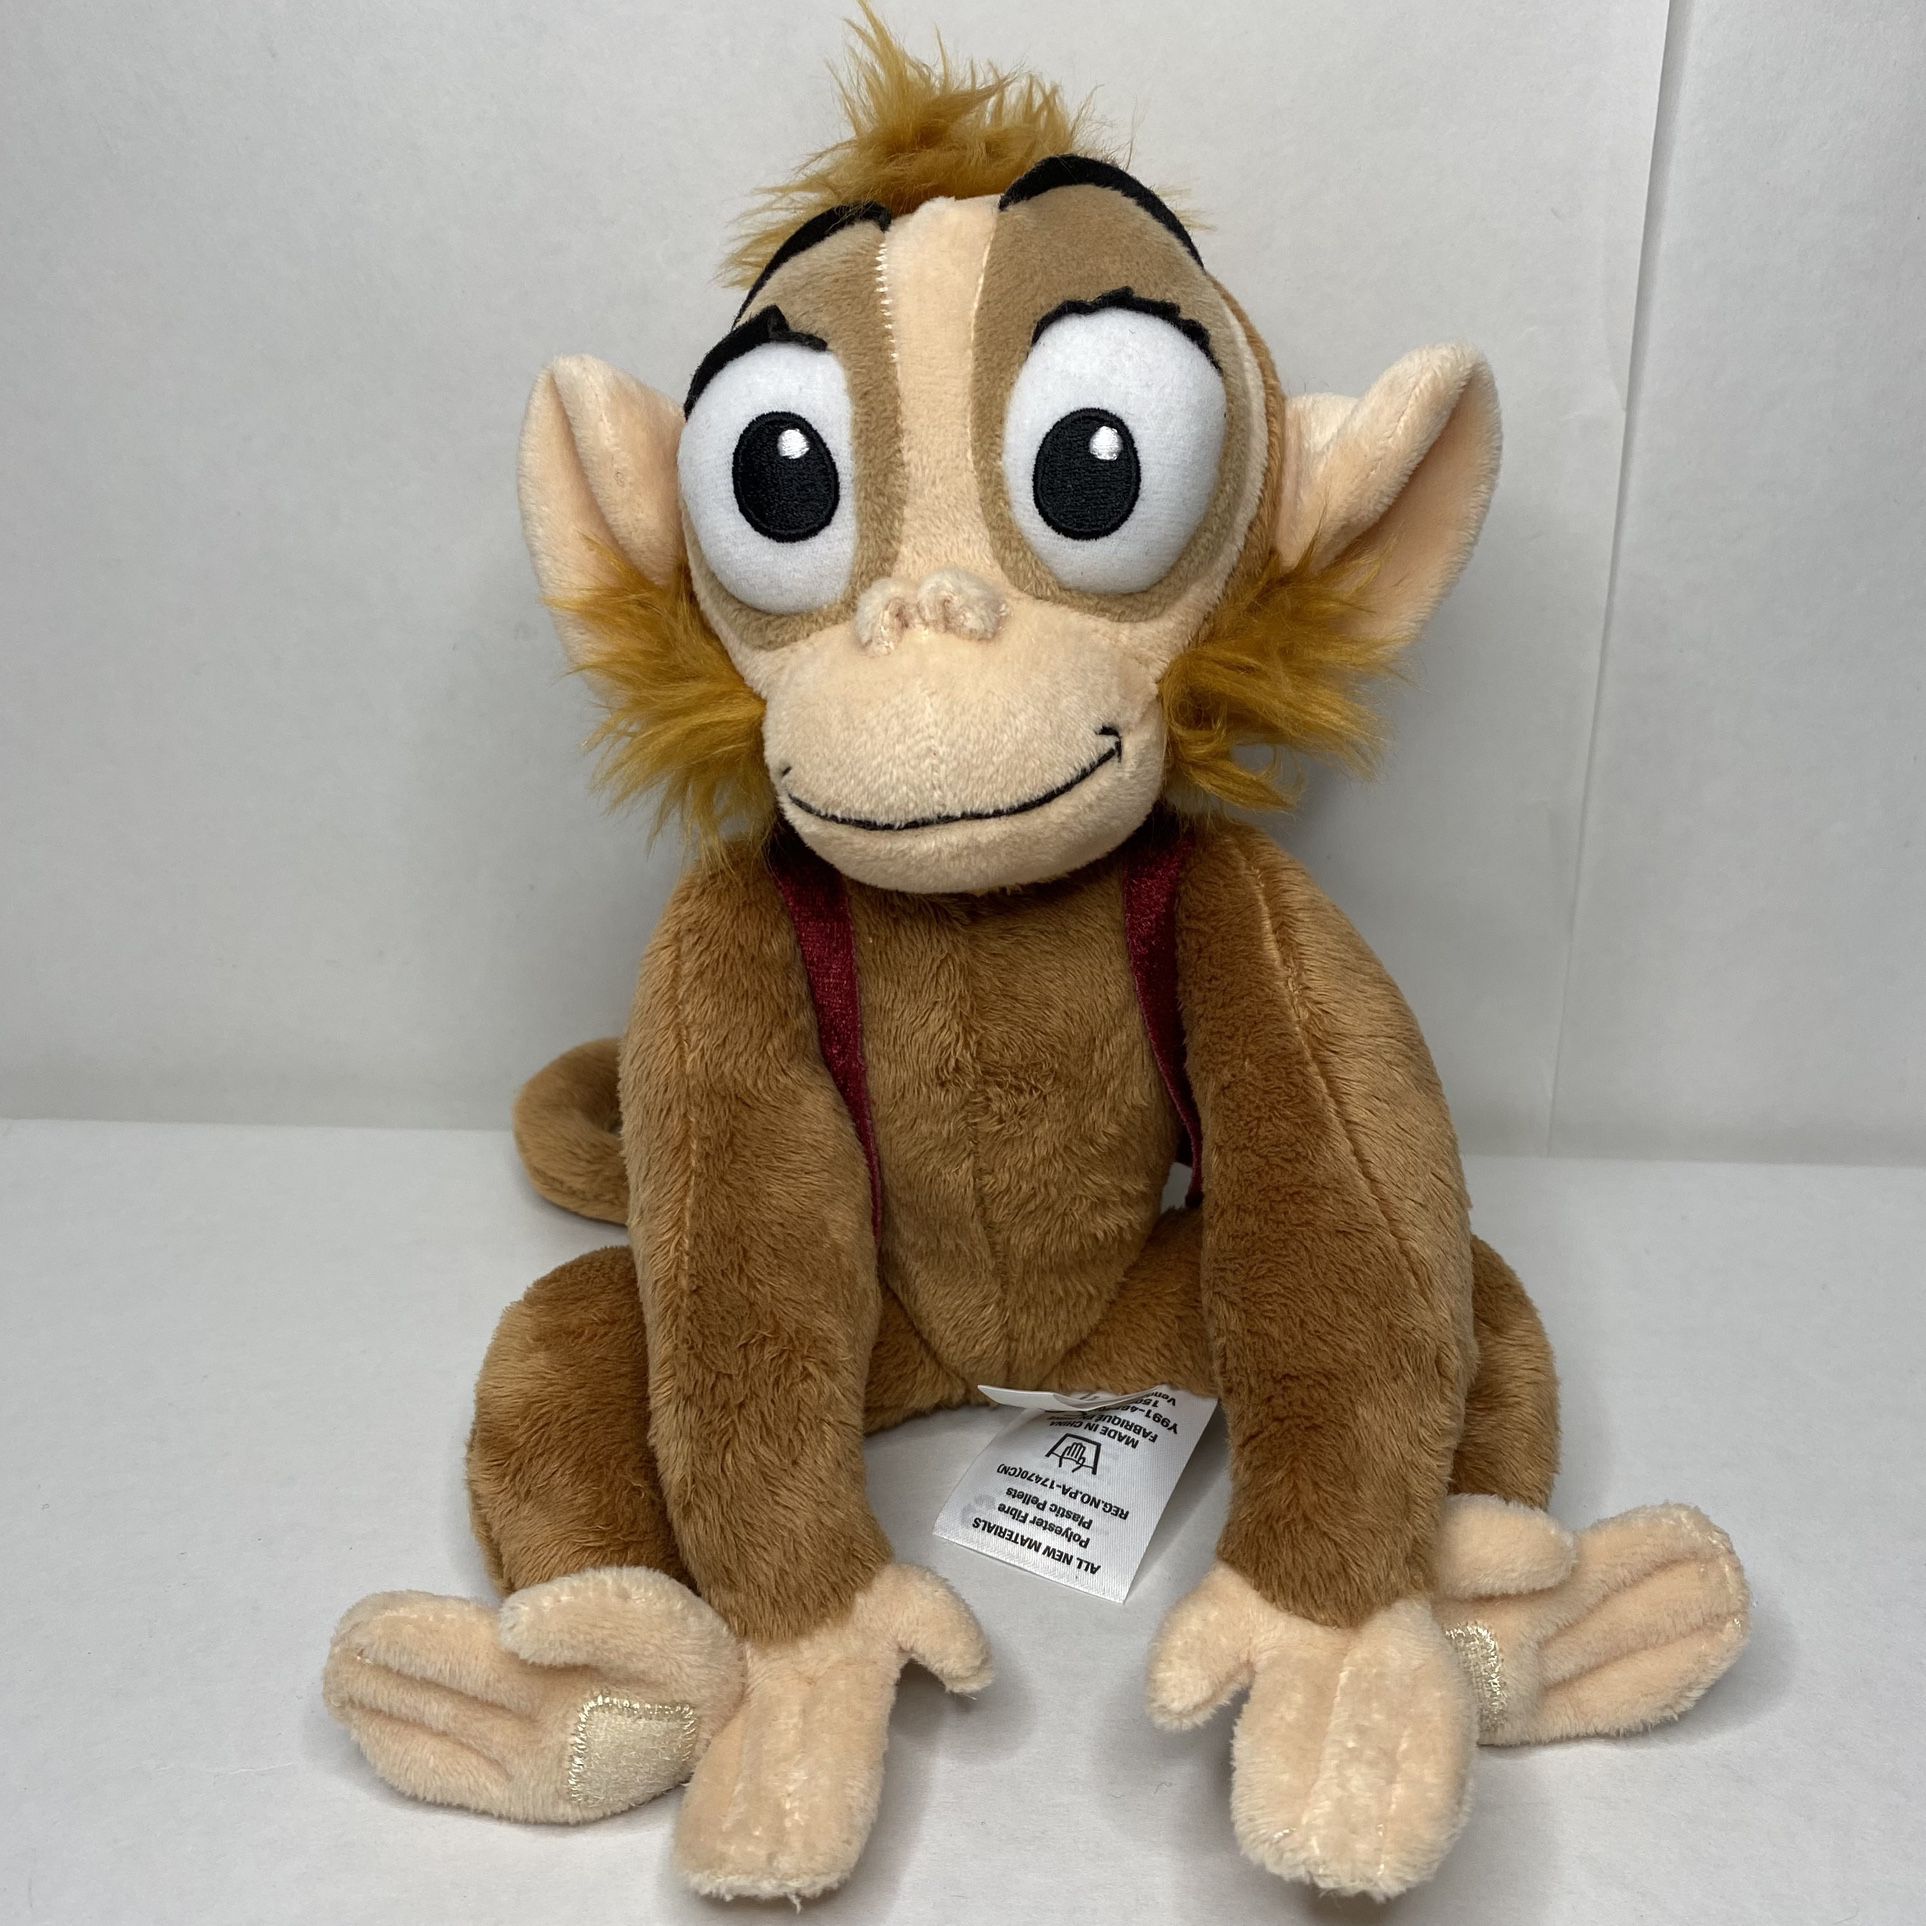 Vintage Disney Store Exclusive Abu Plush Monkey Aladdin Fasteners Hands And Feet